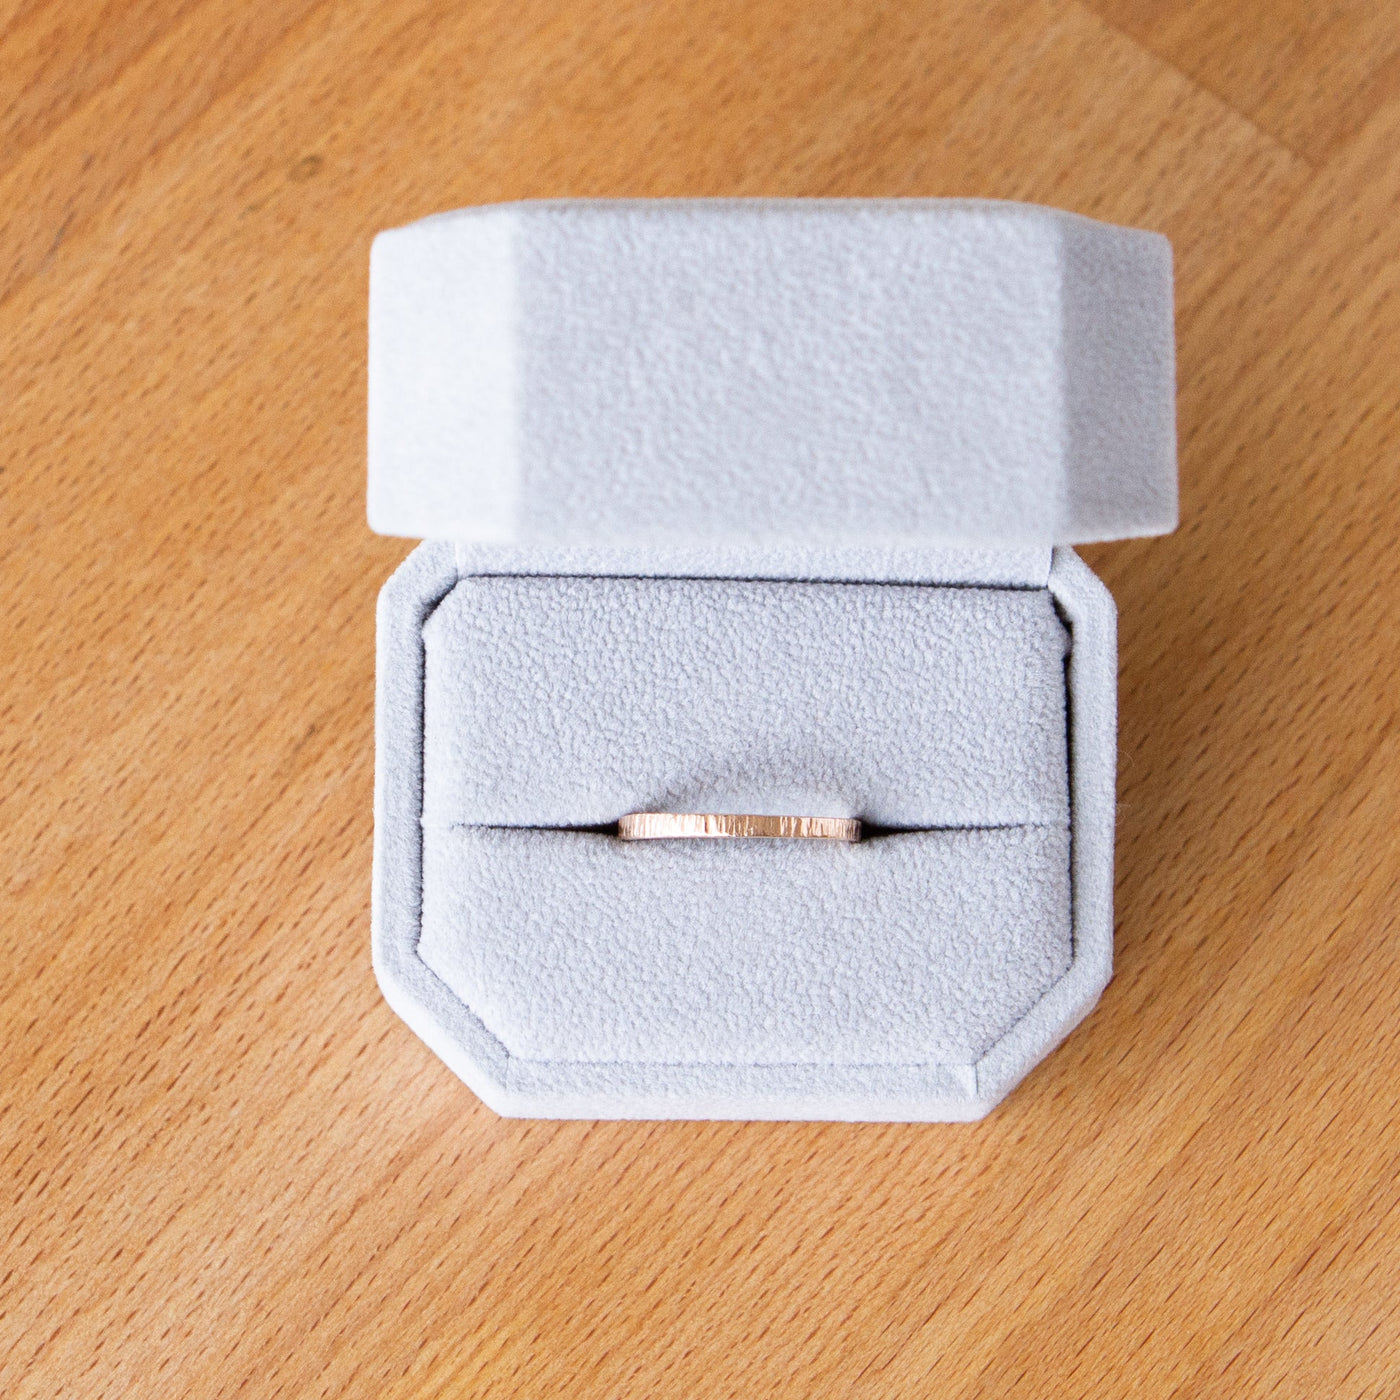 14k rose gold Thin zion flat vertical hammered wedding band in a ring box